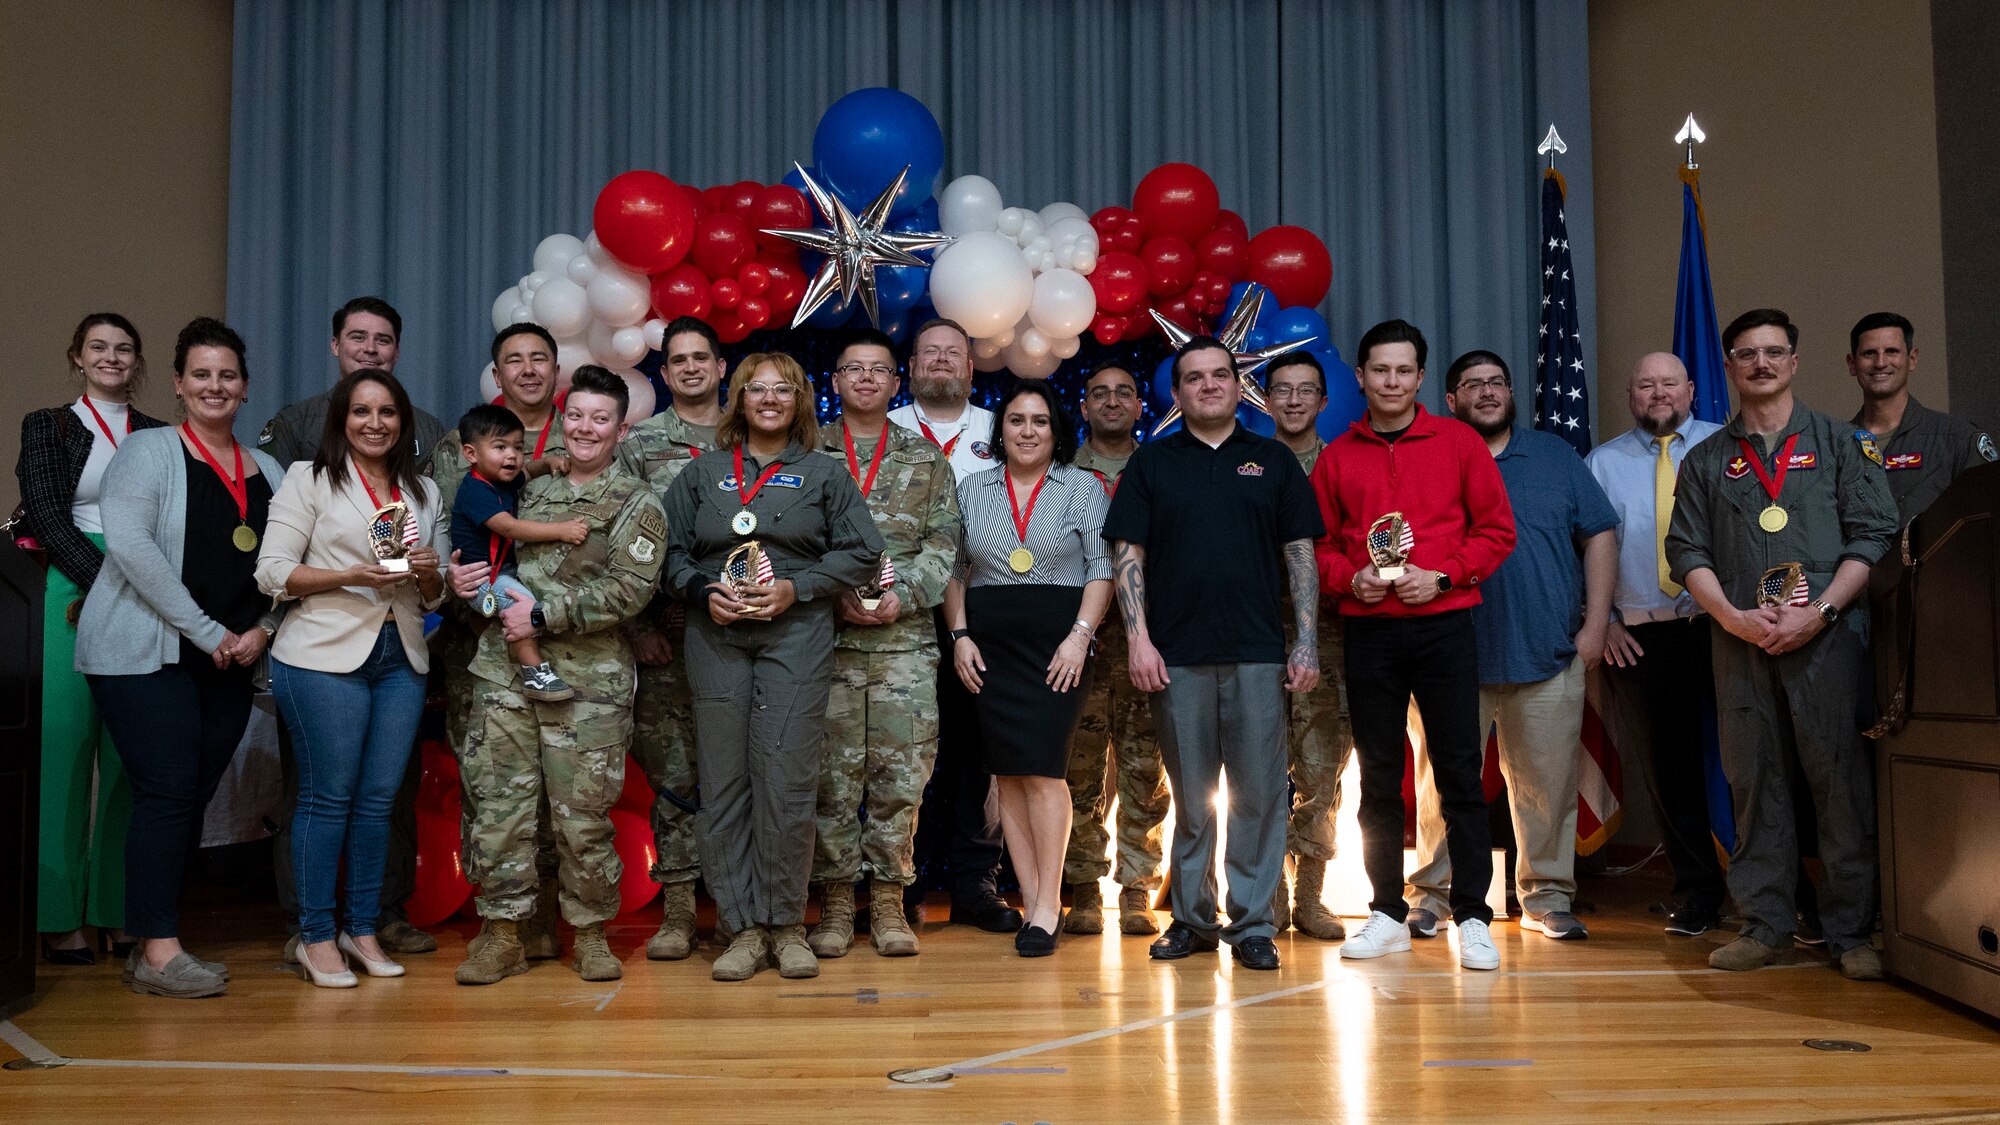 2023 Annual Awards winners pose for a group photo during the 2023 47th FTW Annual Awards Ceremony at Laughlin Air Force Base, Texas, Feb. 2, 2024. The annual awards recognized the top performers throughout the 47th Flying Training Wing during fiscal year 2023. (U.S. Air Force photo by Senior Airman Kailee Reynolds)